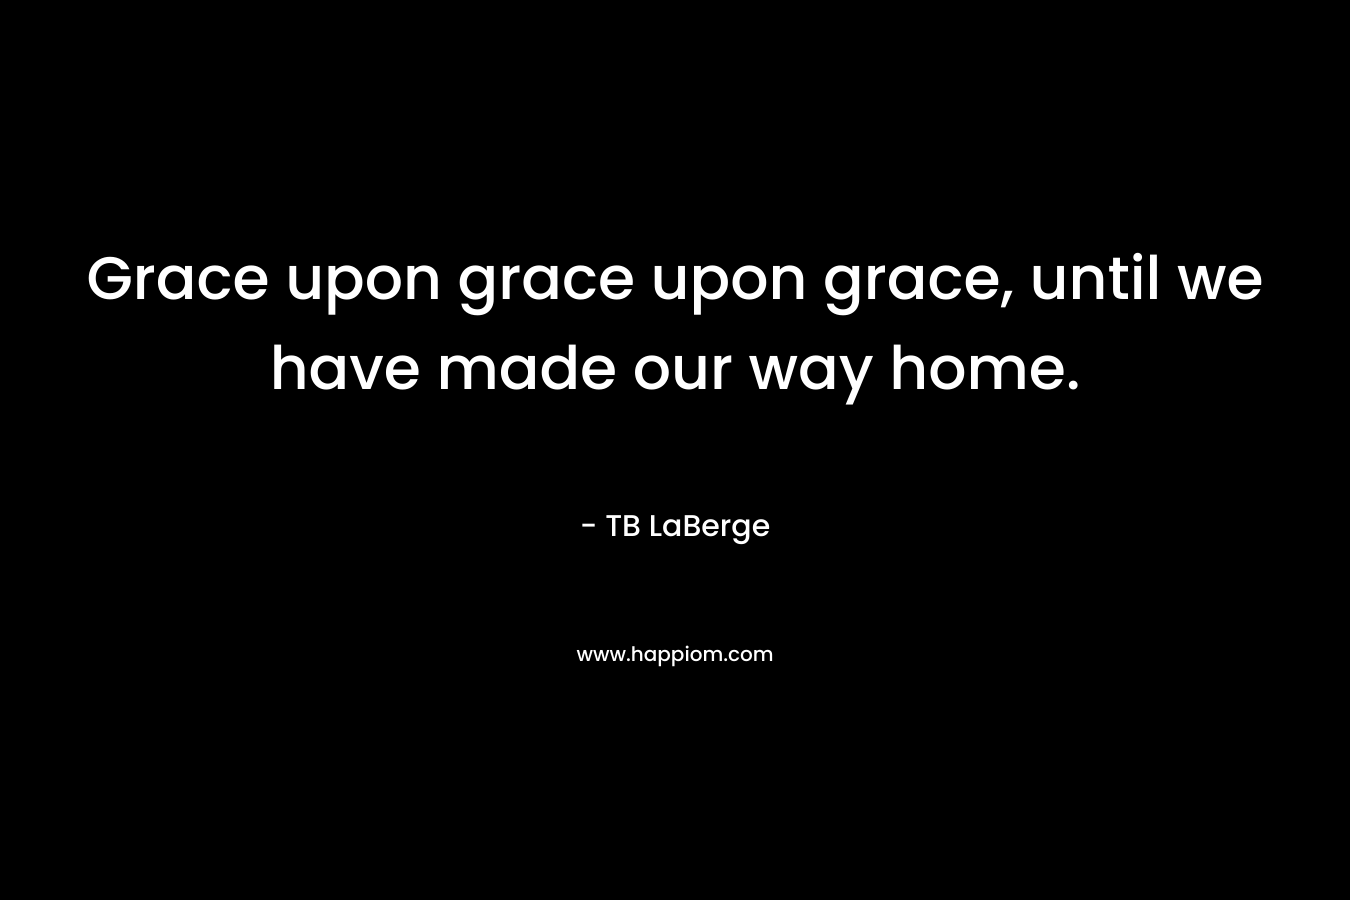 Grace upon grace upon grace, until we have made our way home.